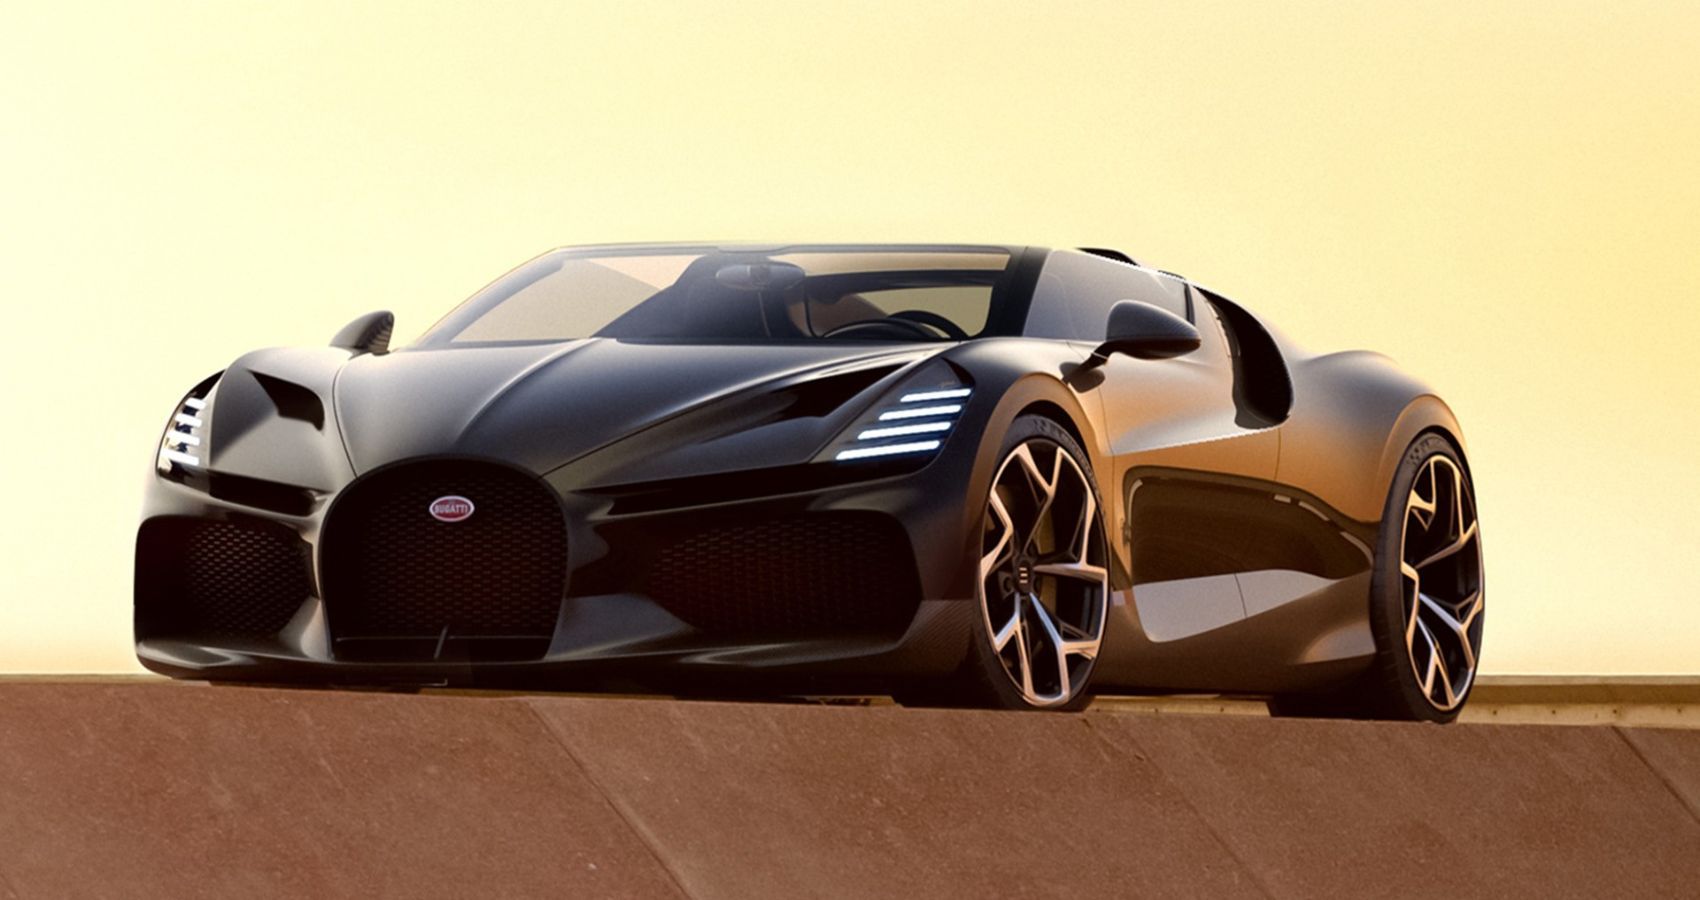 Here's How Bugatti Built The Mistral Roadster To Be The Fastest Convertible Hypercar Ever